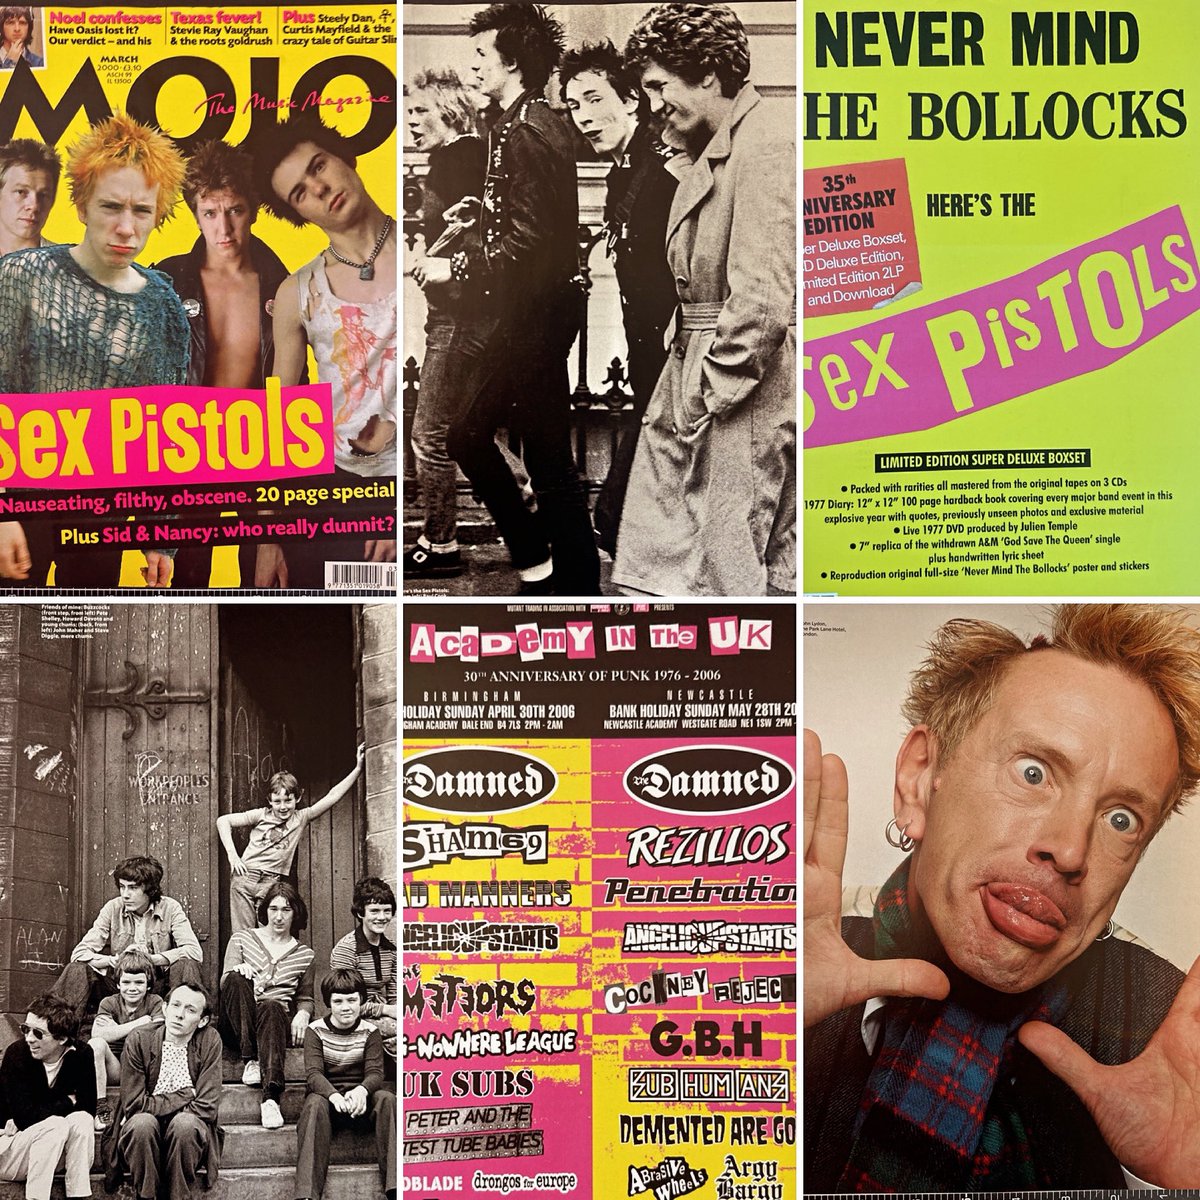 New in the store lots of vintage punk ads and photos ready to frame including 
#sexpistols #johnlydon #buzzcocks #thestranglers and many more adrockmusic.com